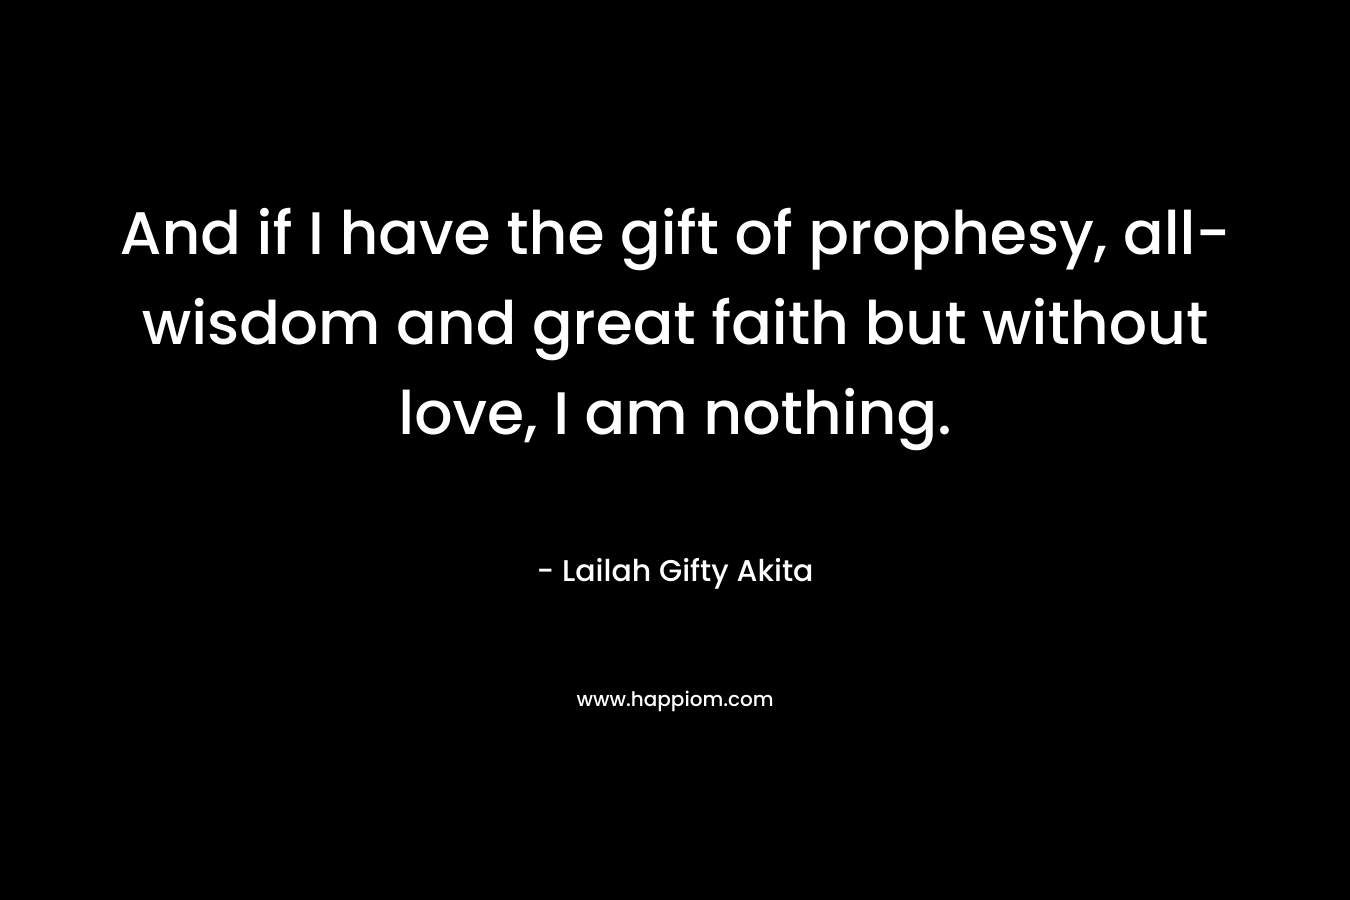 And if I have the gift of prophesy, all-wisdom and great faith but without love, I am nothing.